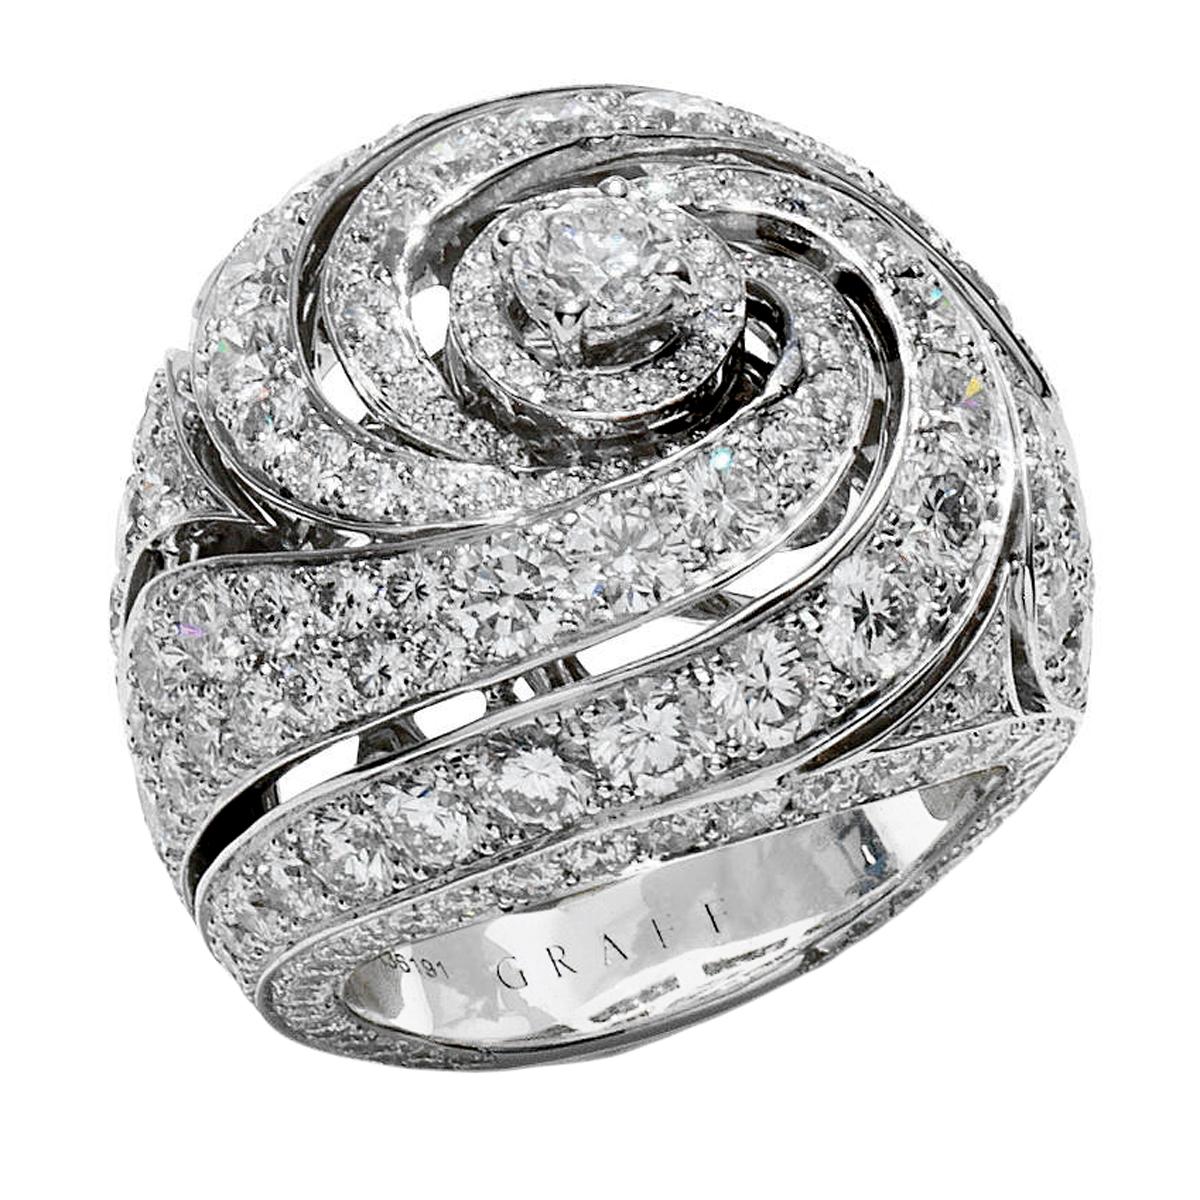 An incredible diamond ring by Graff showcasing 6.83ct of the finest round brilliant cut diamonds set in 18k white gold. This showstopping diamond cocktail ring measures a size 5 1/2 and can be resized if needed.